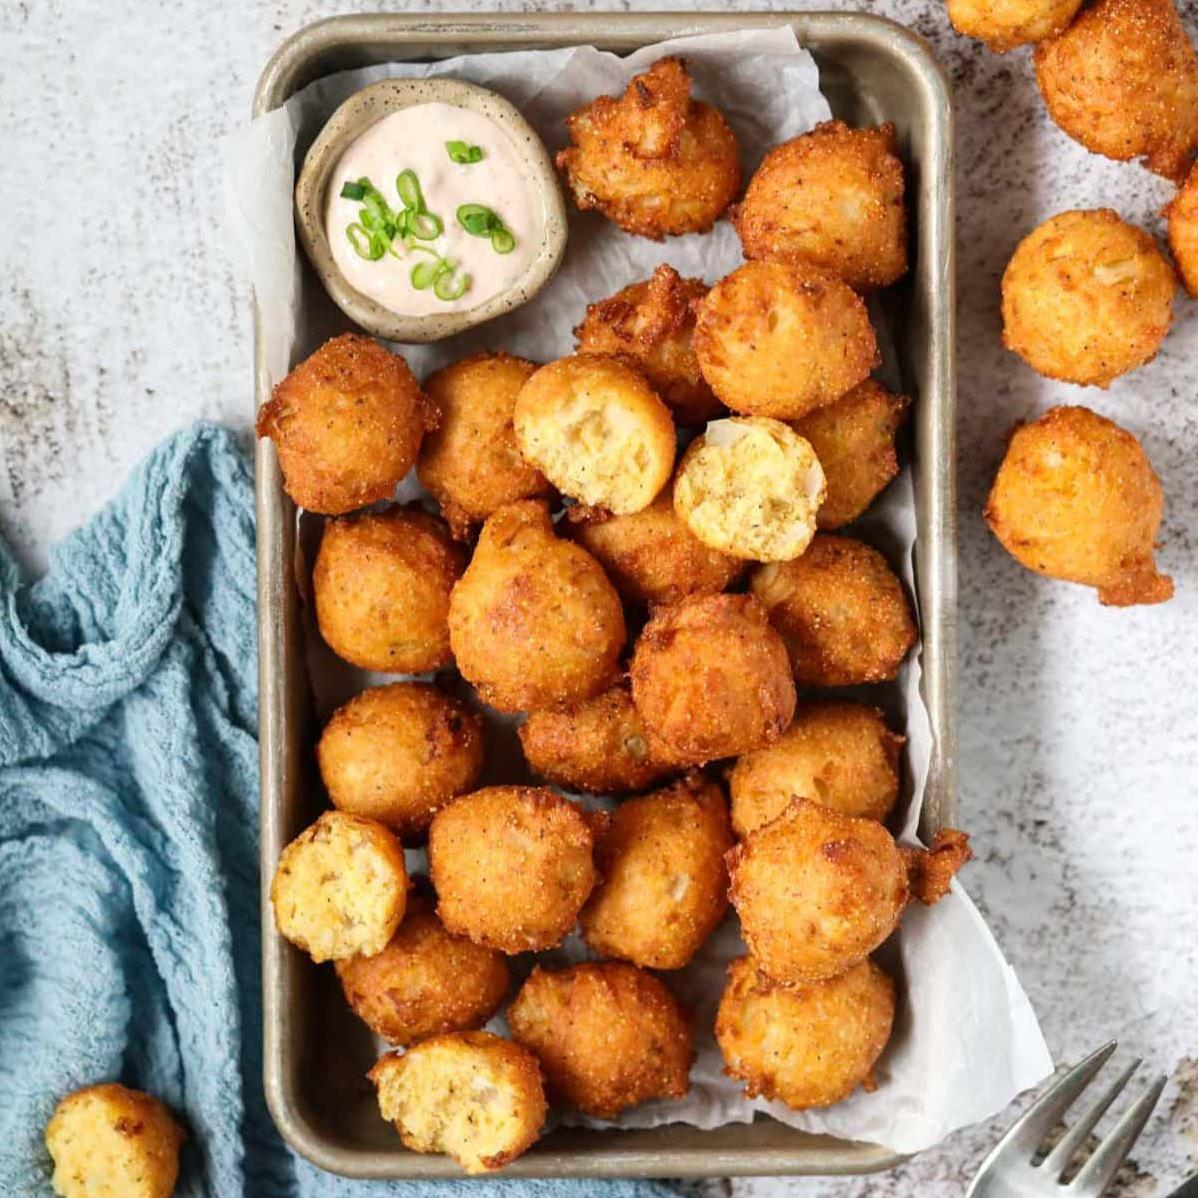  Served hot and fresh, these hush puppies are a match made in heaven for seafood lovers.